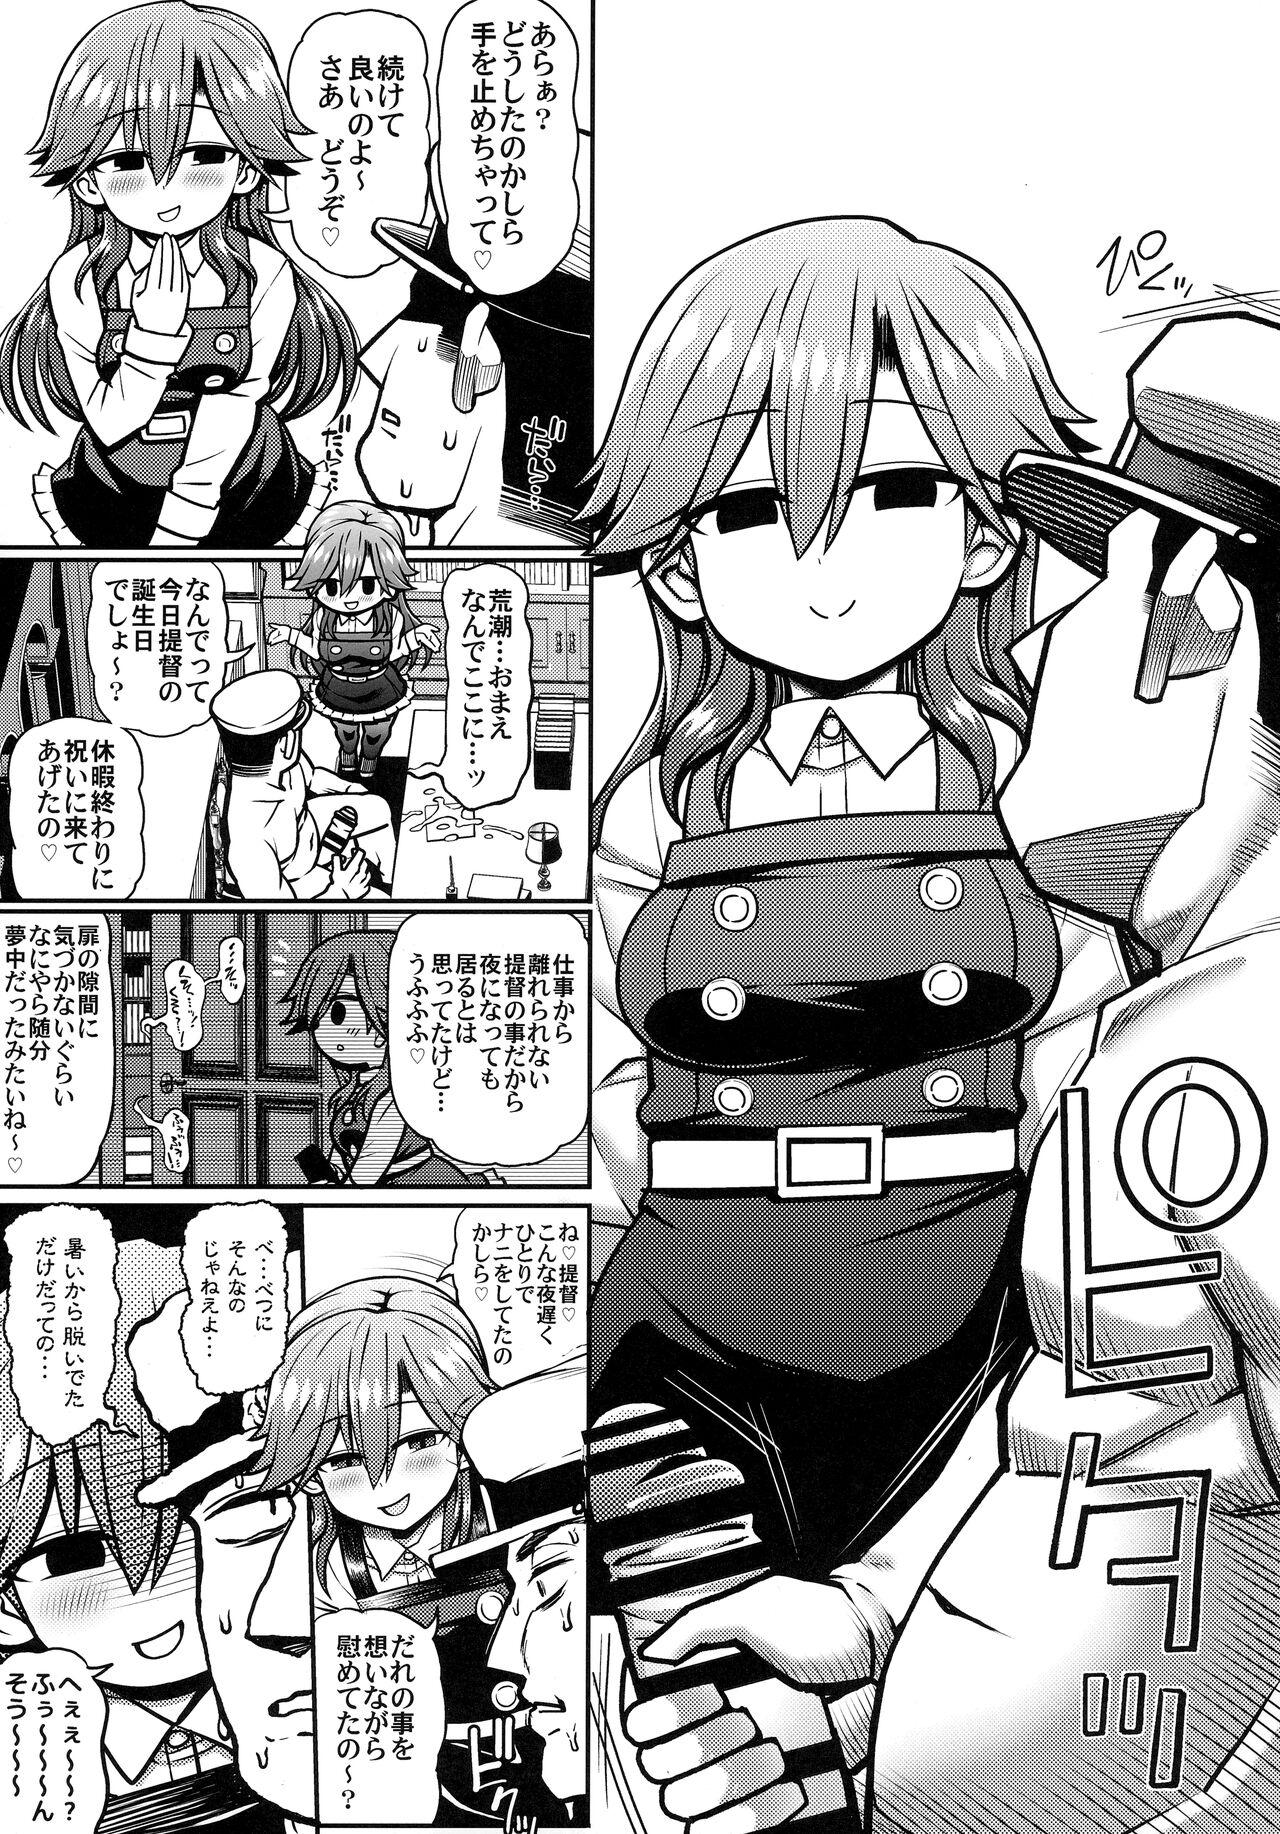 Food おまえのせいだからな! - Kantai collection Best Blowjobs Ever - Page 6